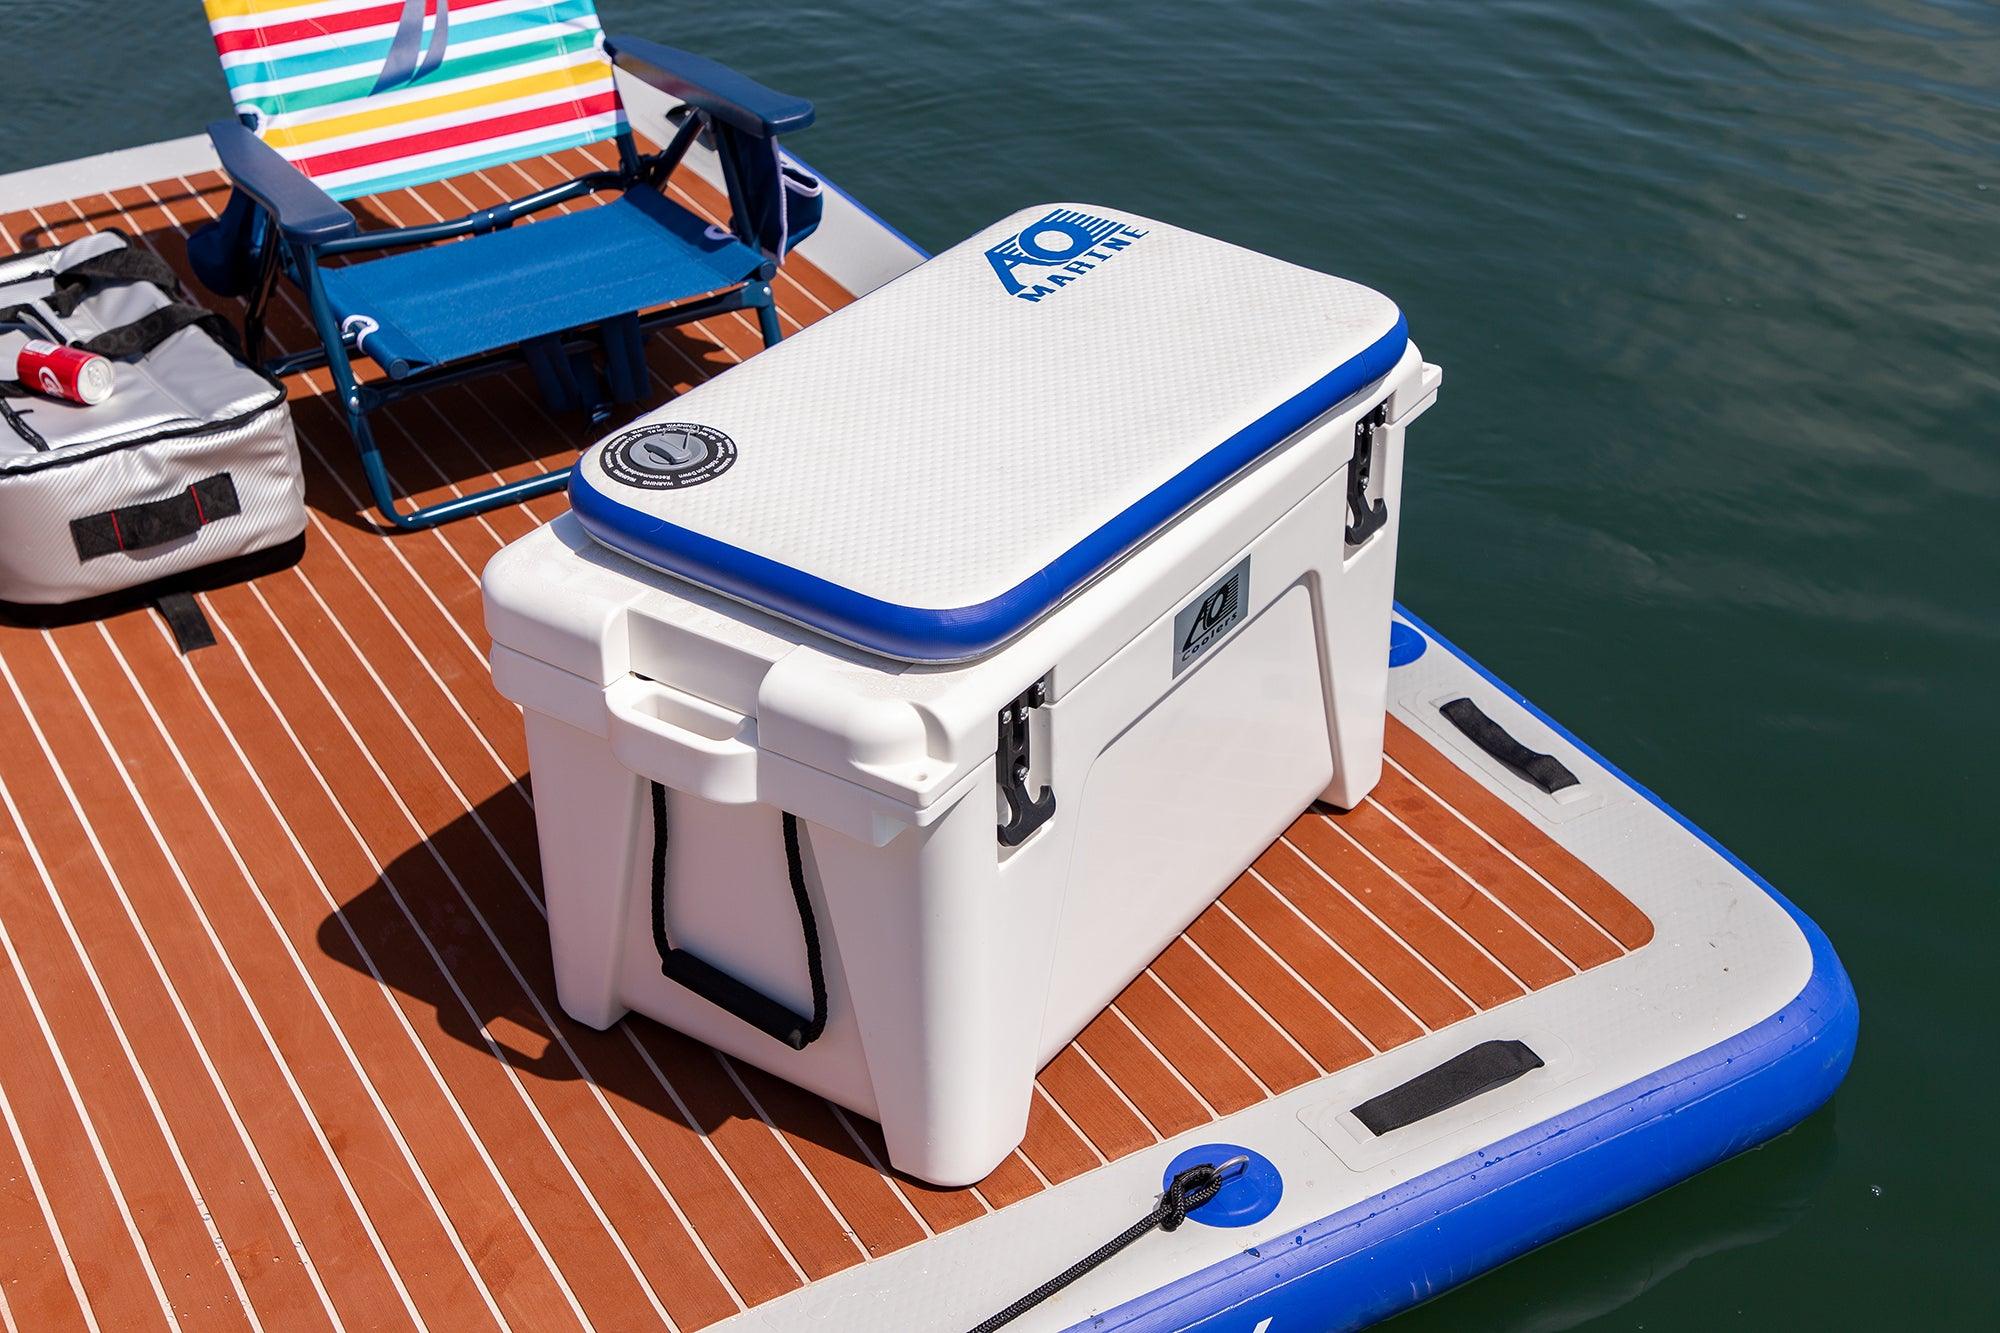 AO Marine Inflatable Cooler Cushion – AO Coolers